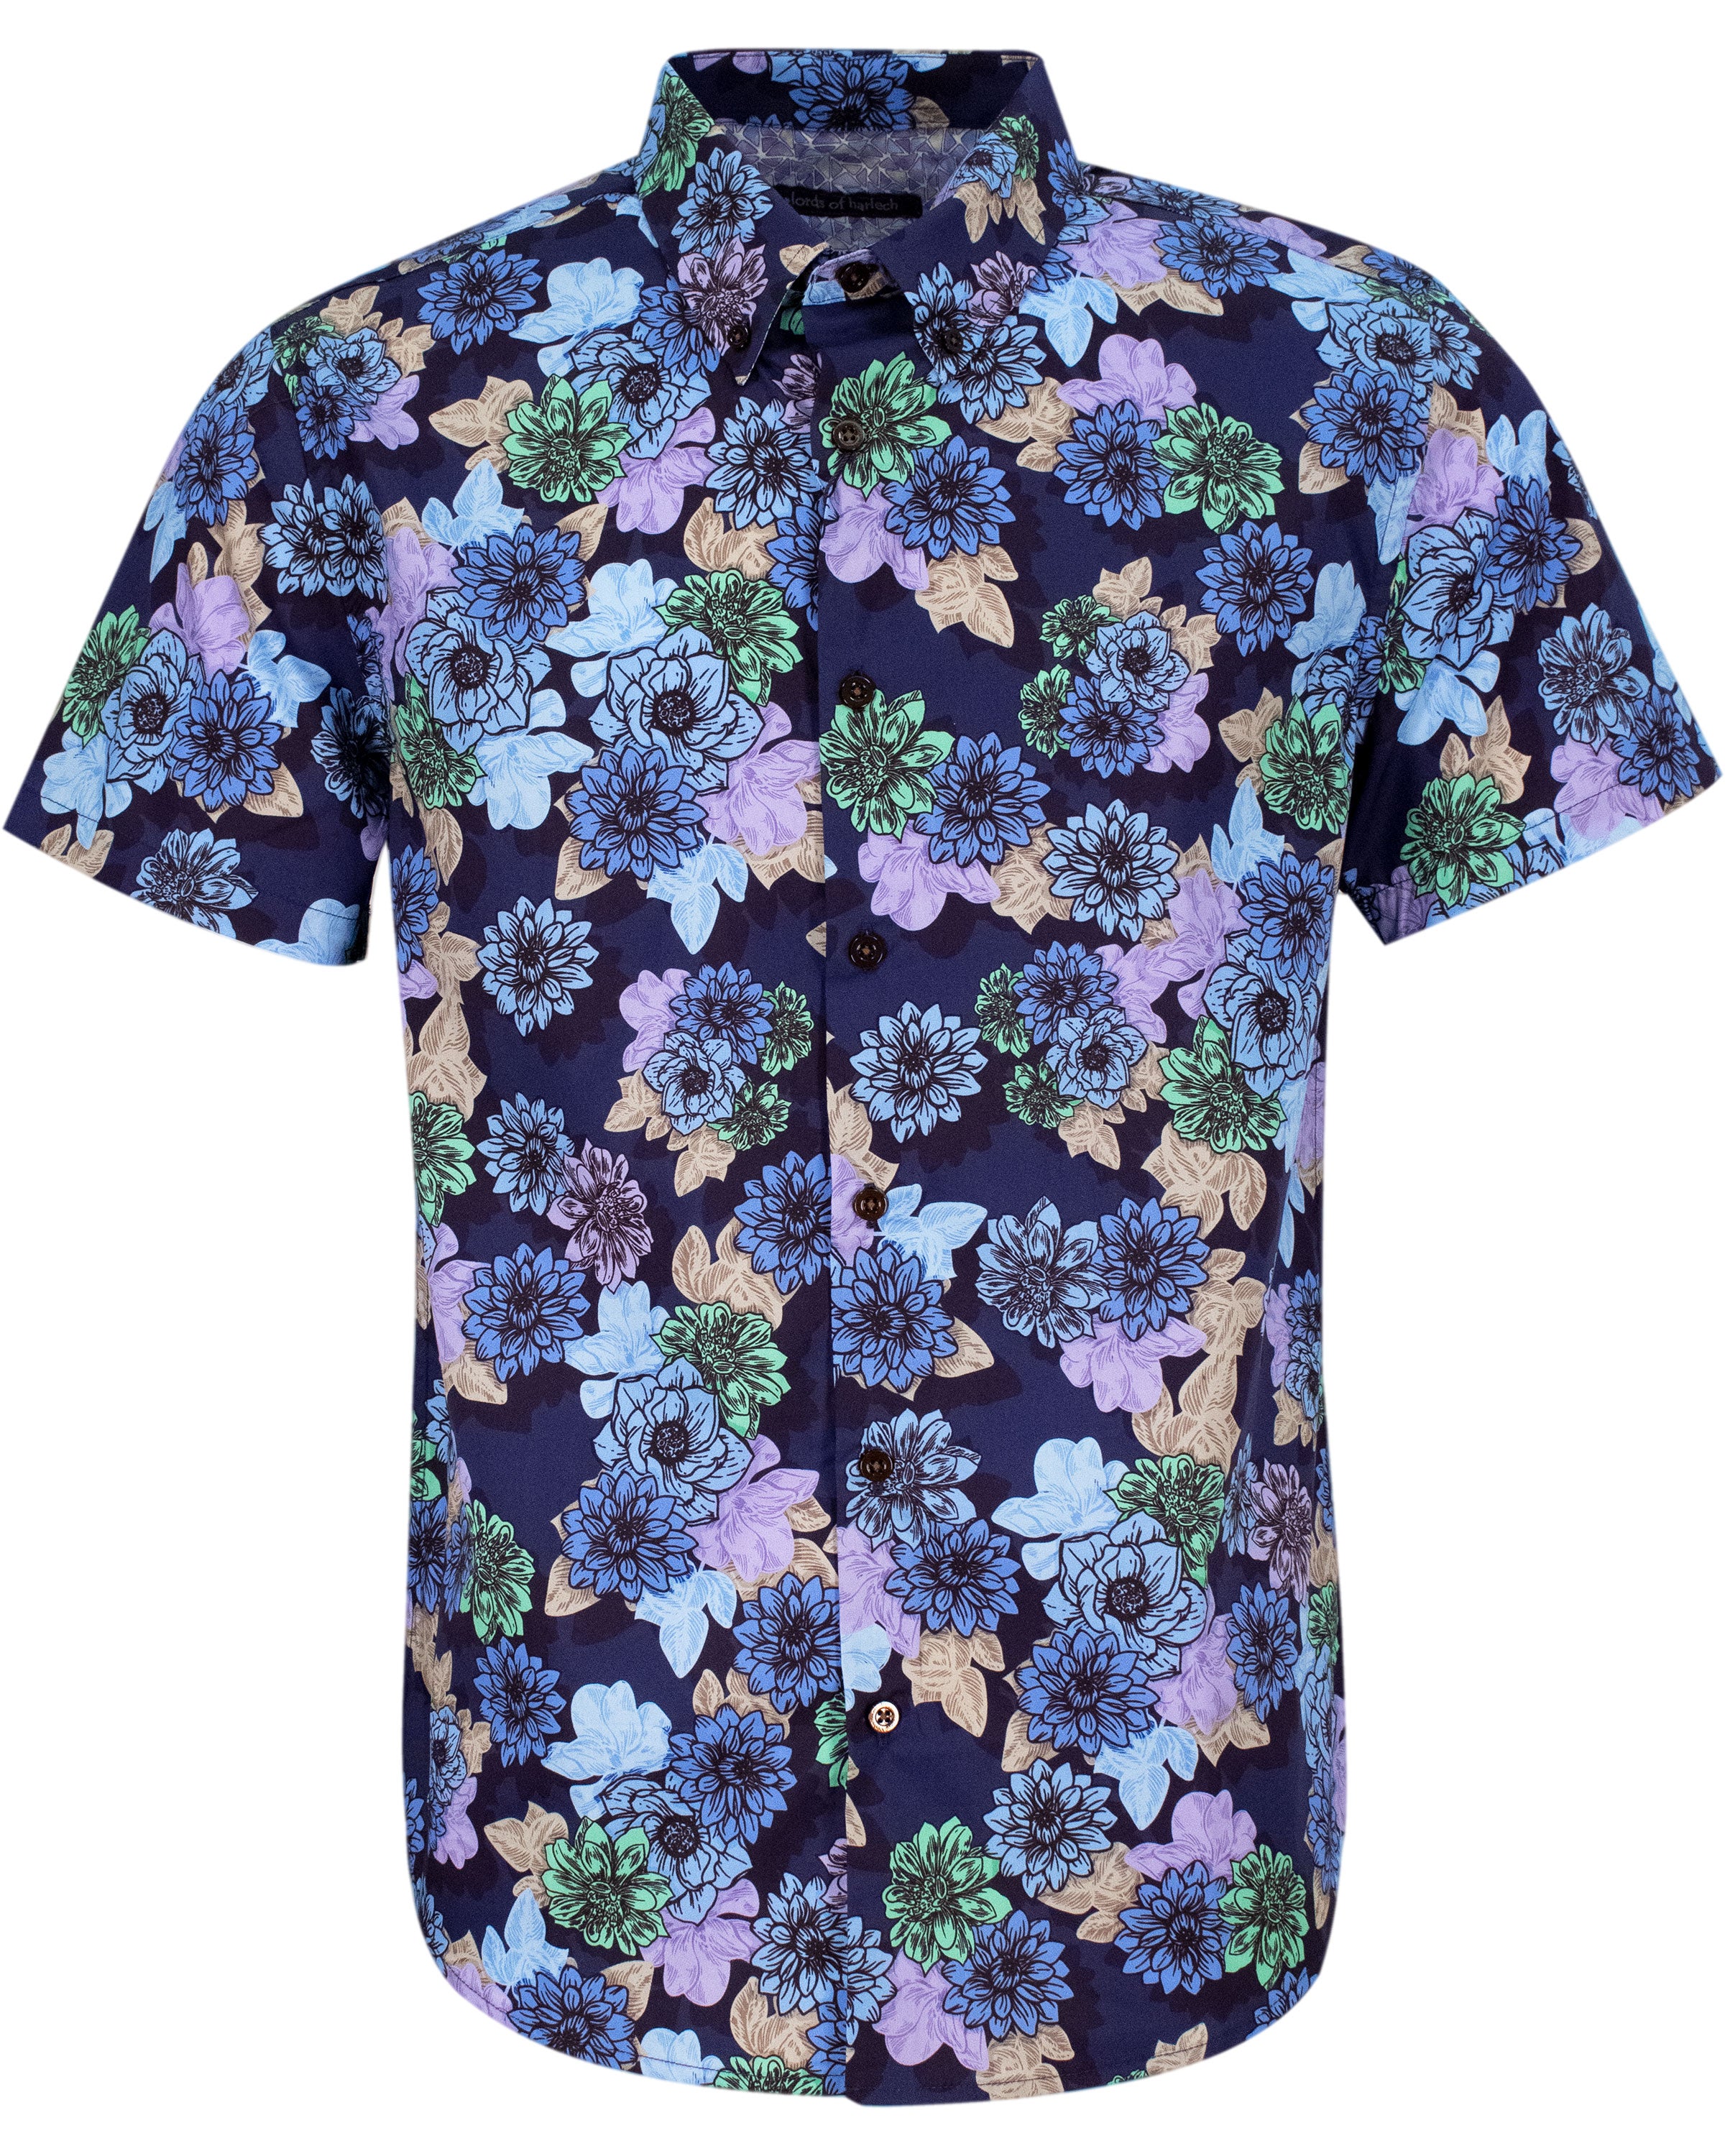 Men’s Blue Tim Snap Floral Shirt - Navy Extra Large Lords of Harlech